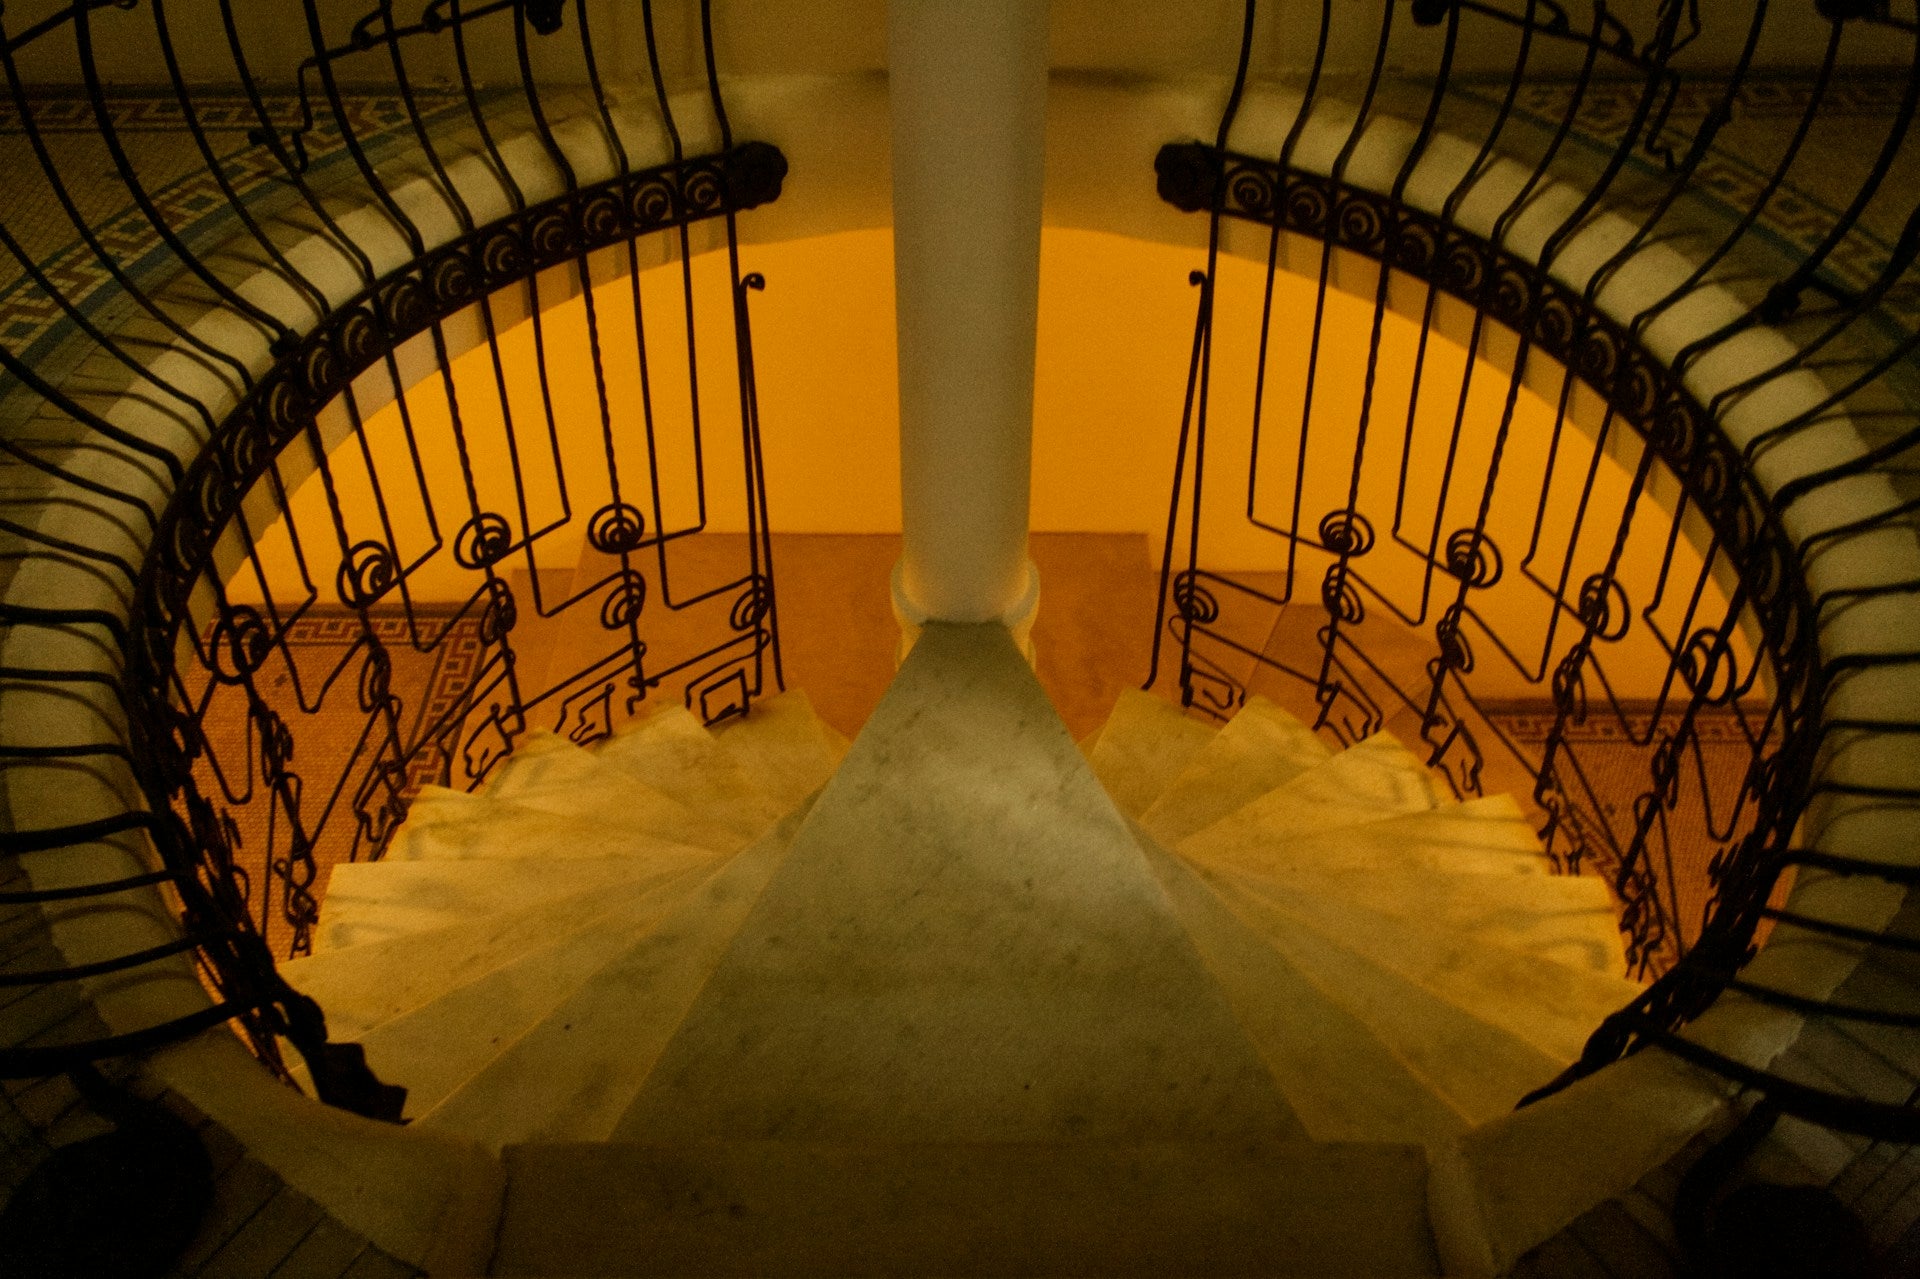 A spiral staircase in a building with golden light.